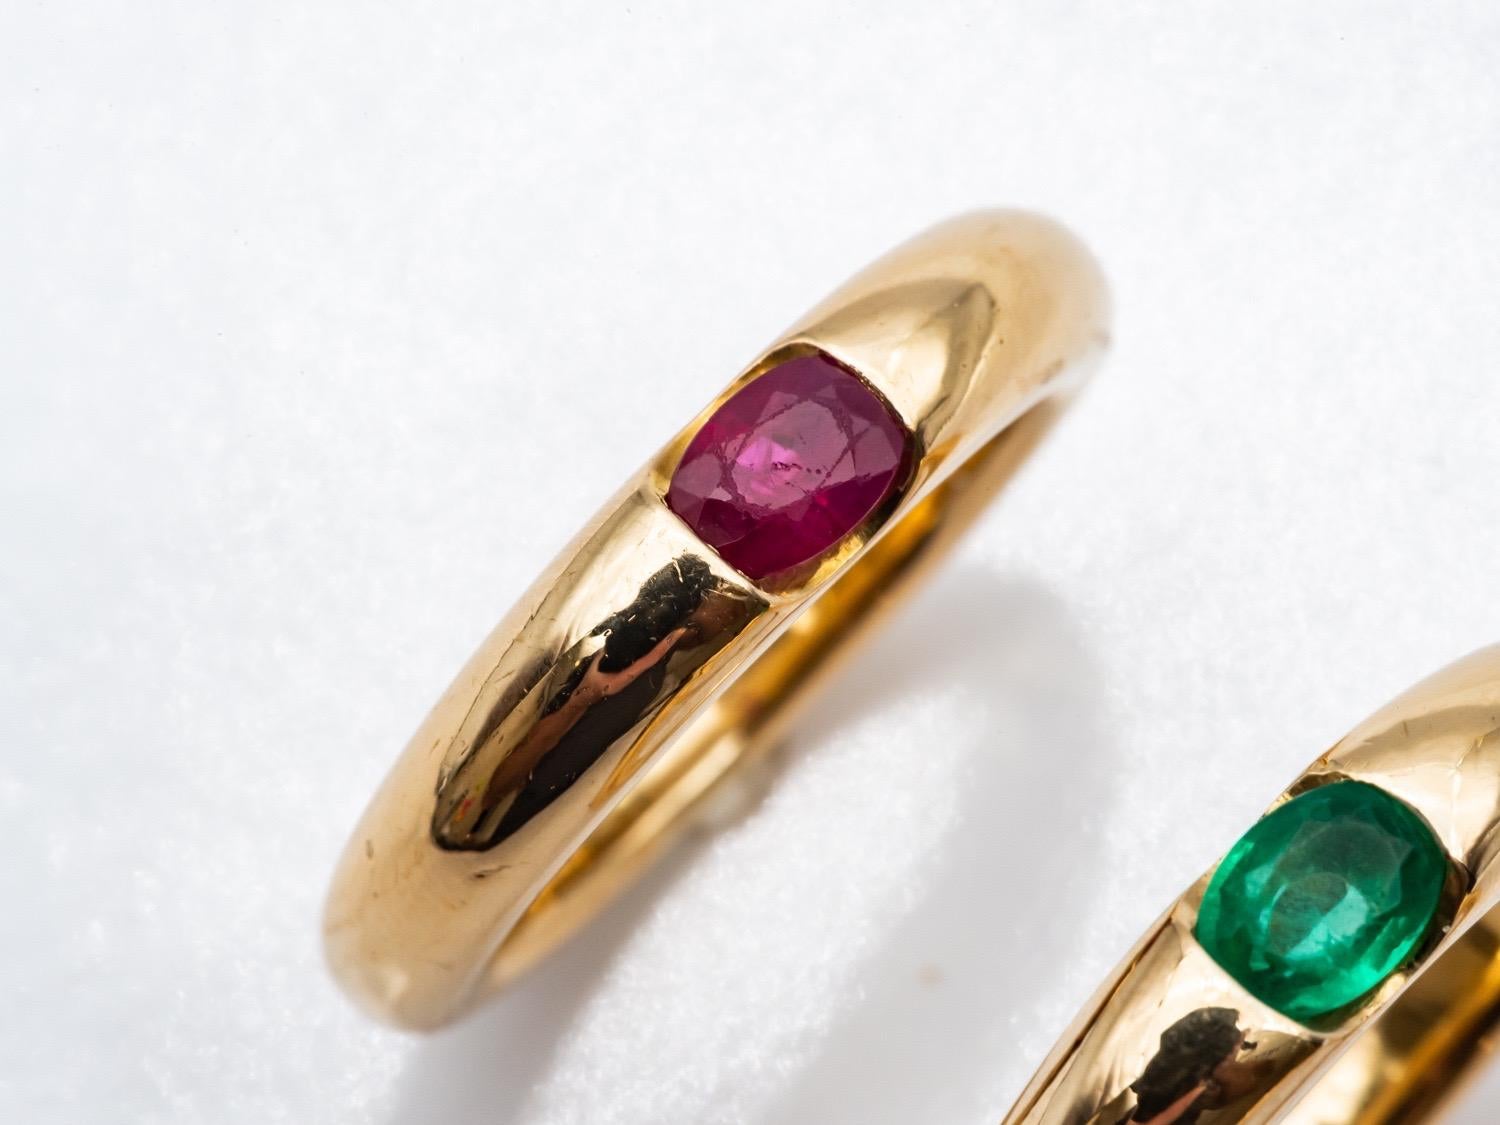 Women's or Men's Three 18 Karat Gold Bangles Rings Set with an Emerald, a Sapphire, and a Ruby